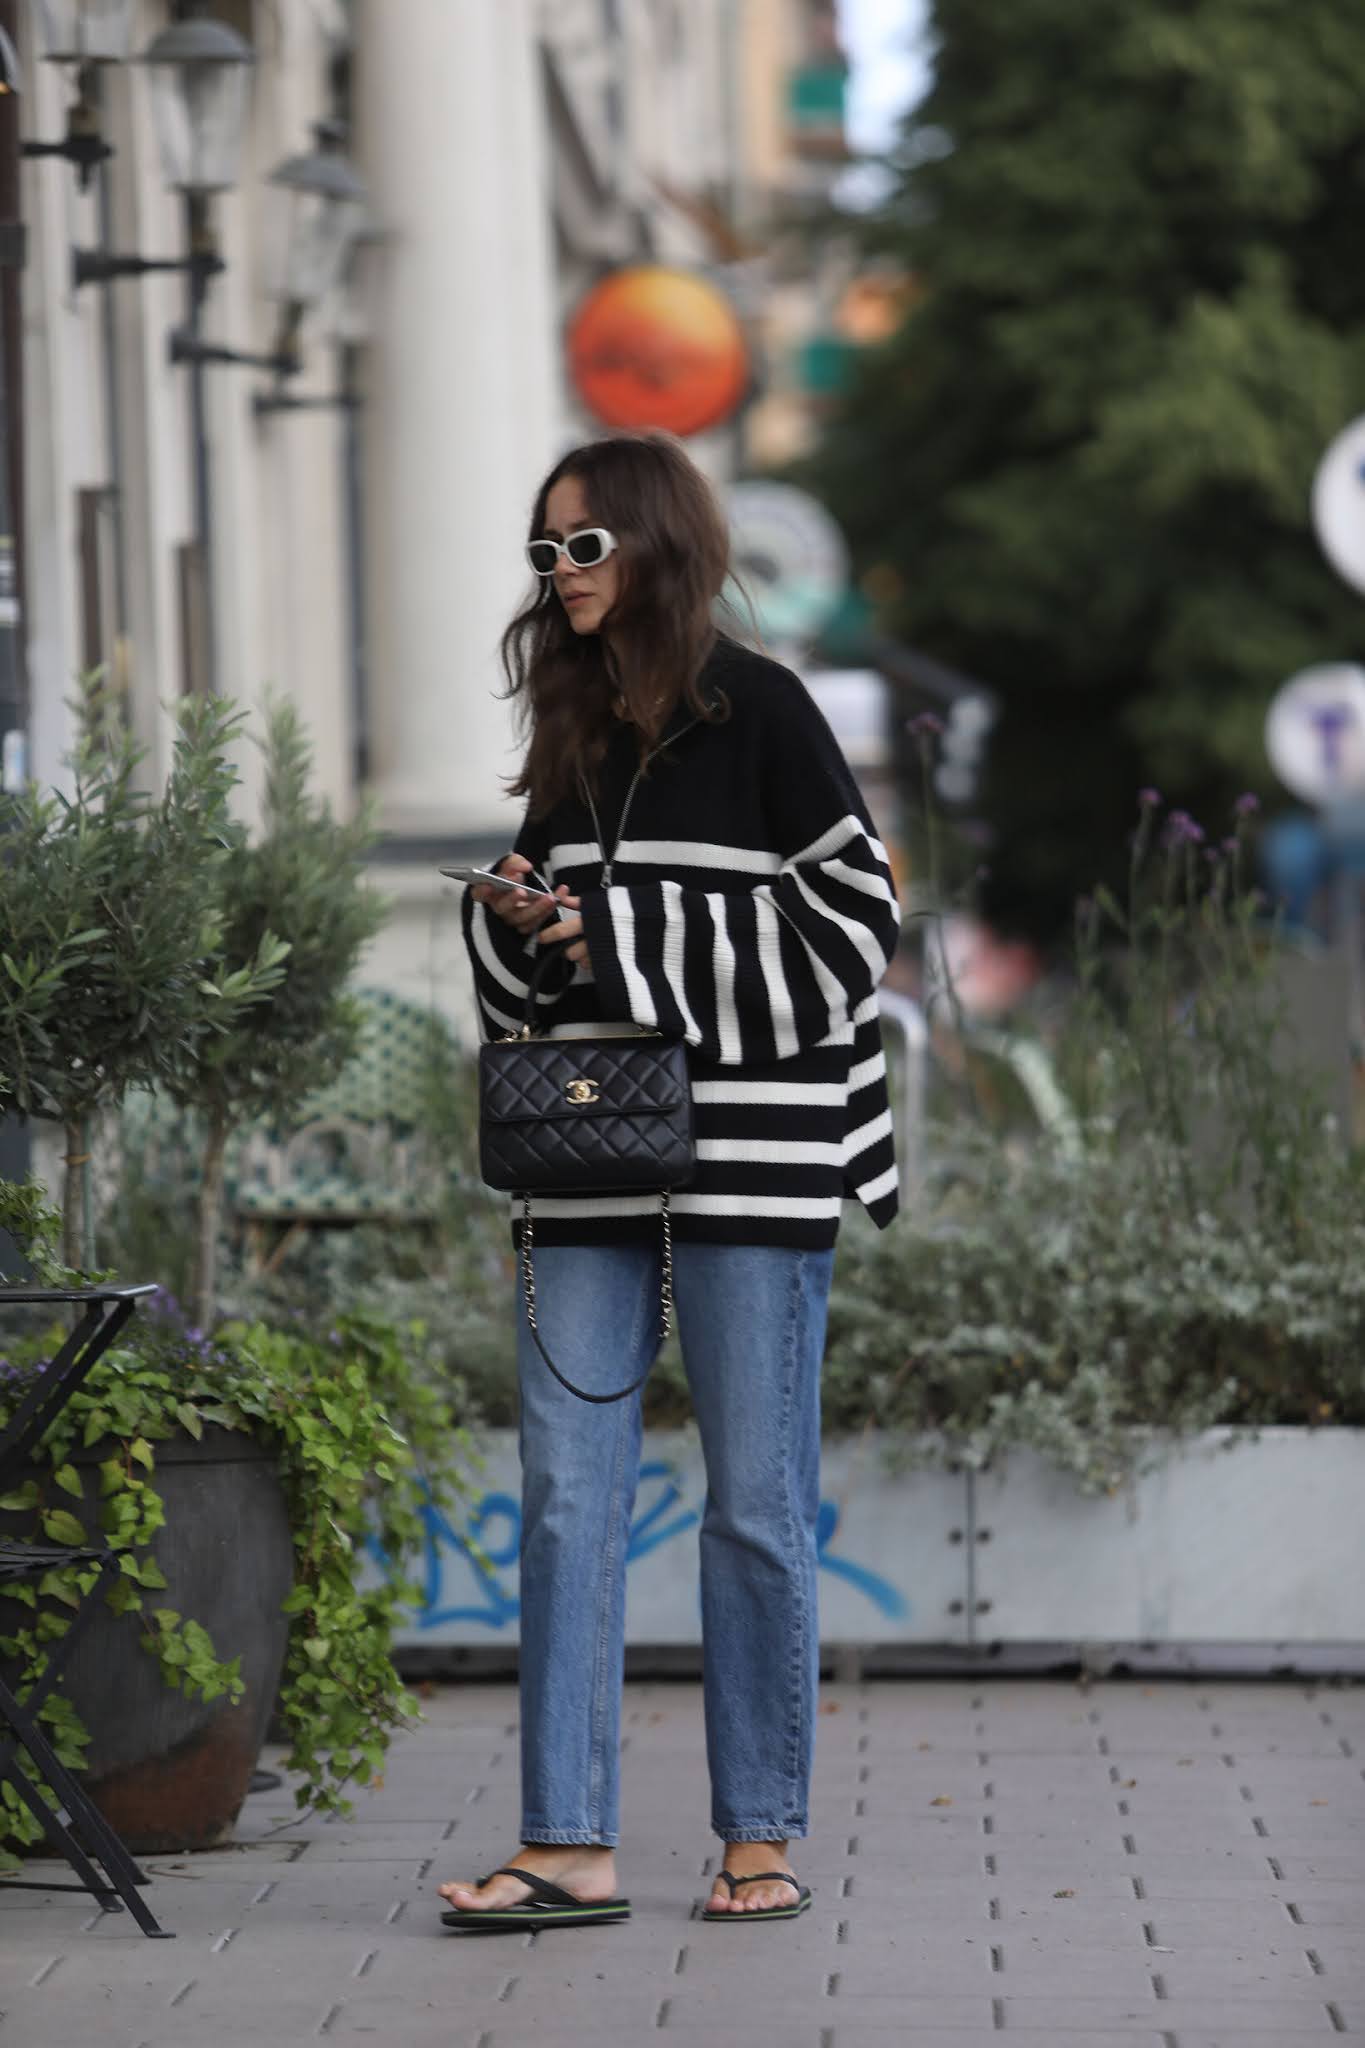 Best Striped Half-Zip Sweaters — Caroline Blomst of Carolines Mode winter outfit in a striped pullover knit, jeans, Chanel bag, and flip-flops